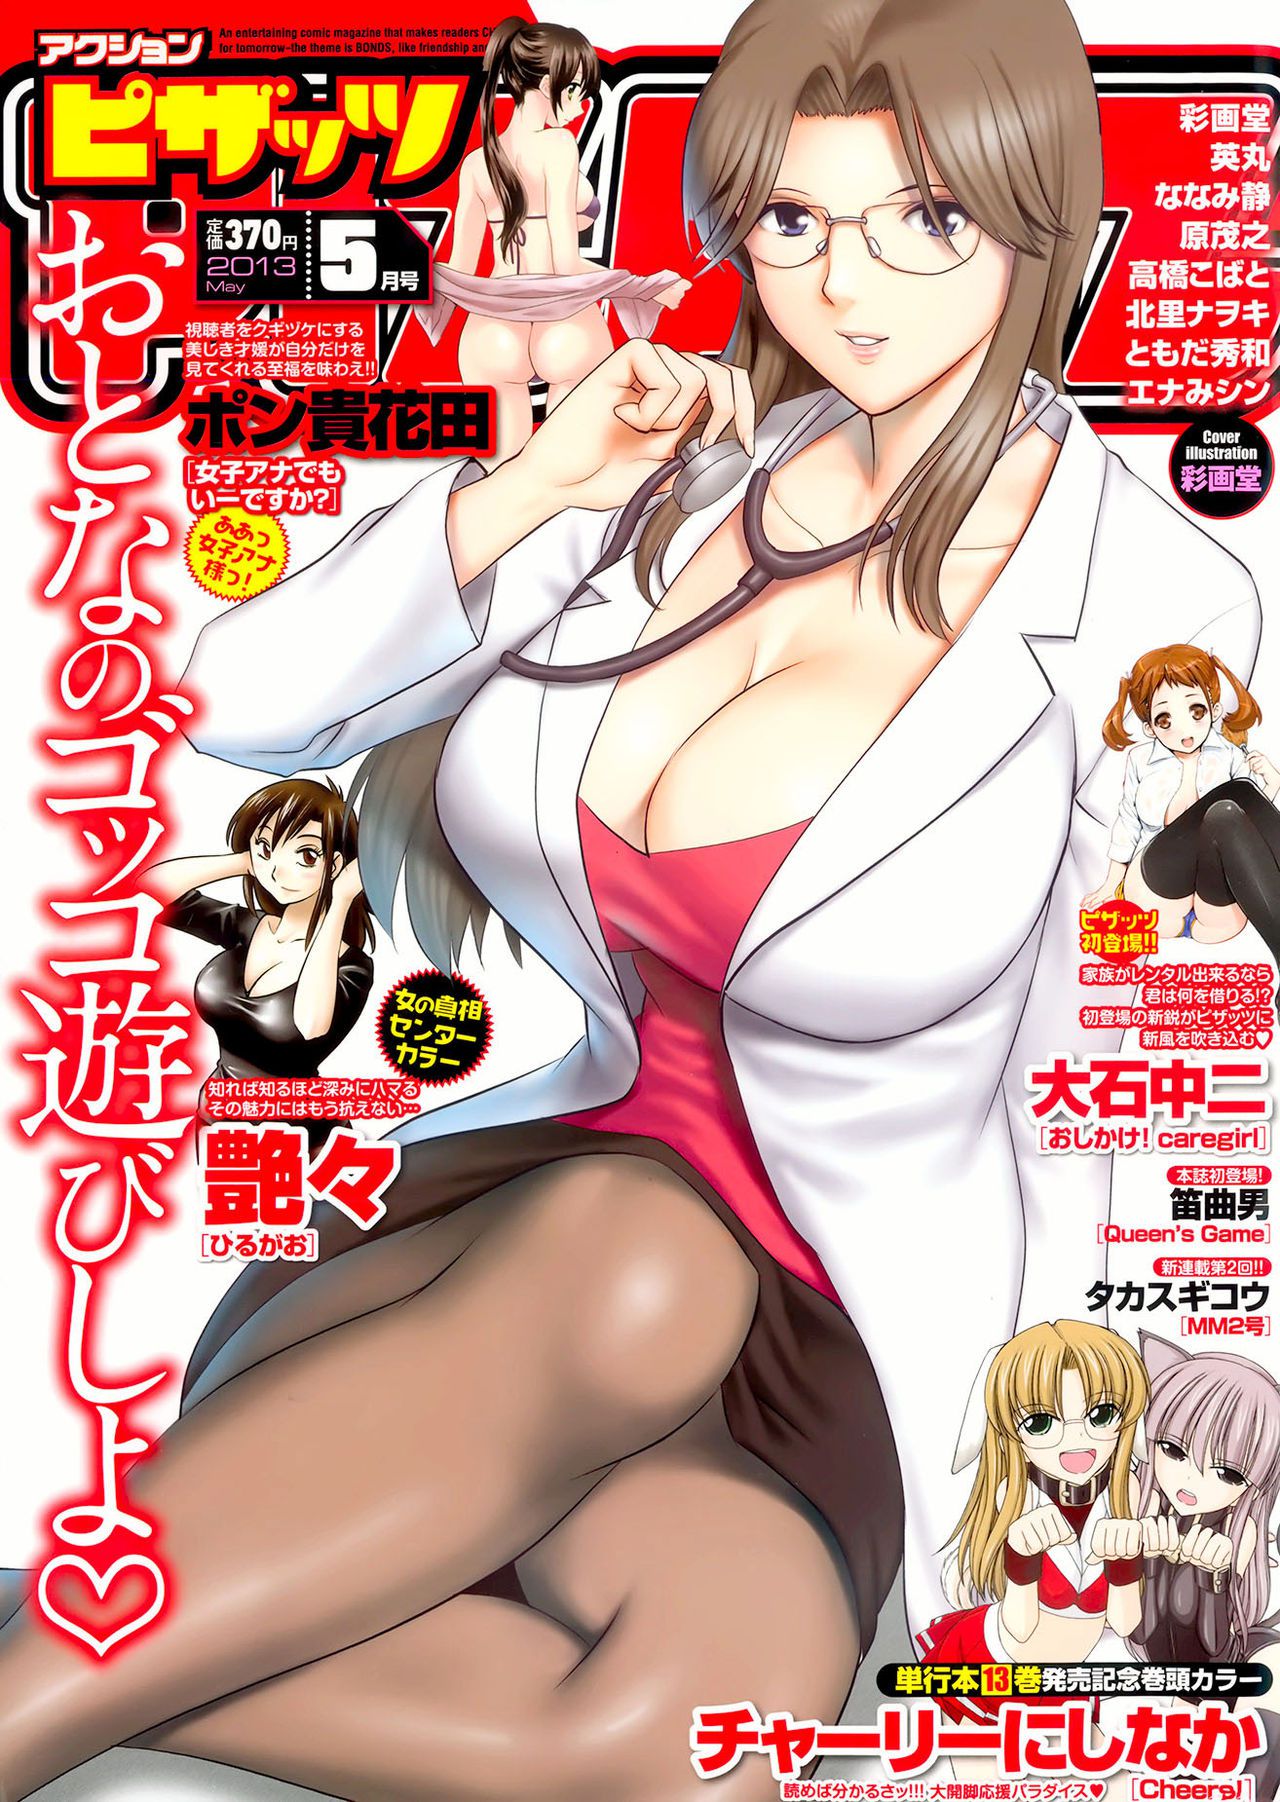 [Saigado] Cover Illustrations [彩画堂] Cover Illustrations 63